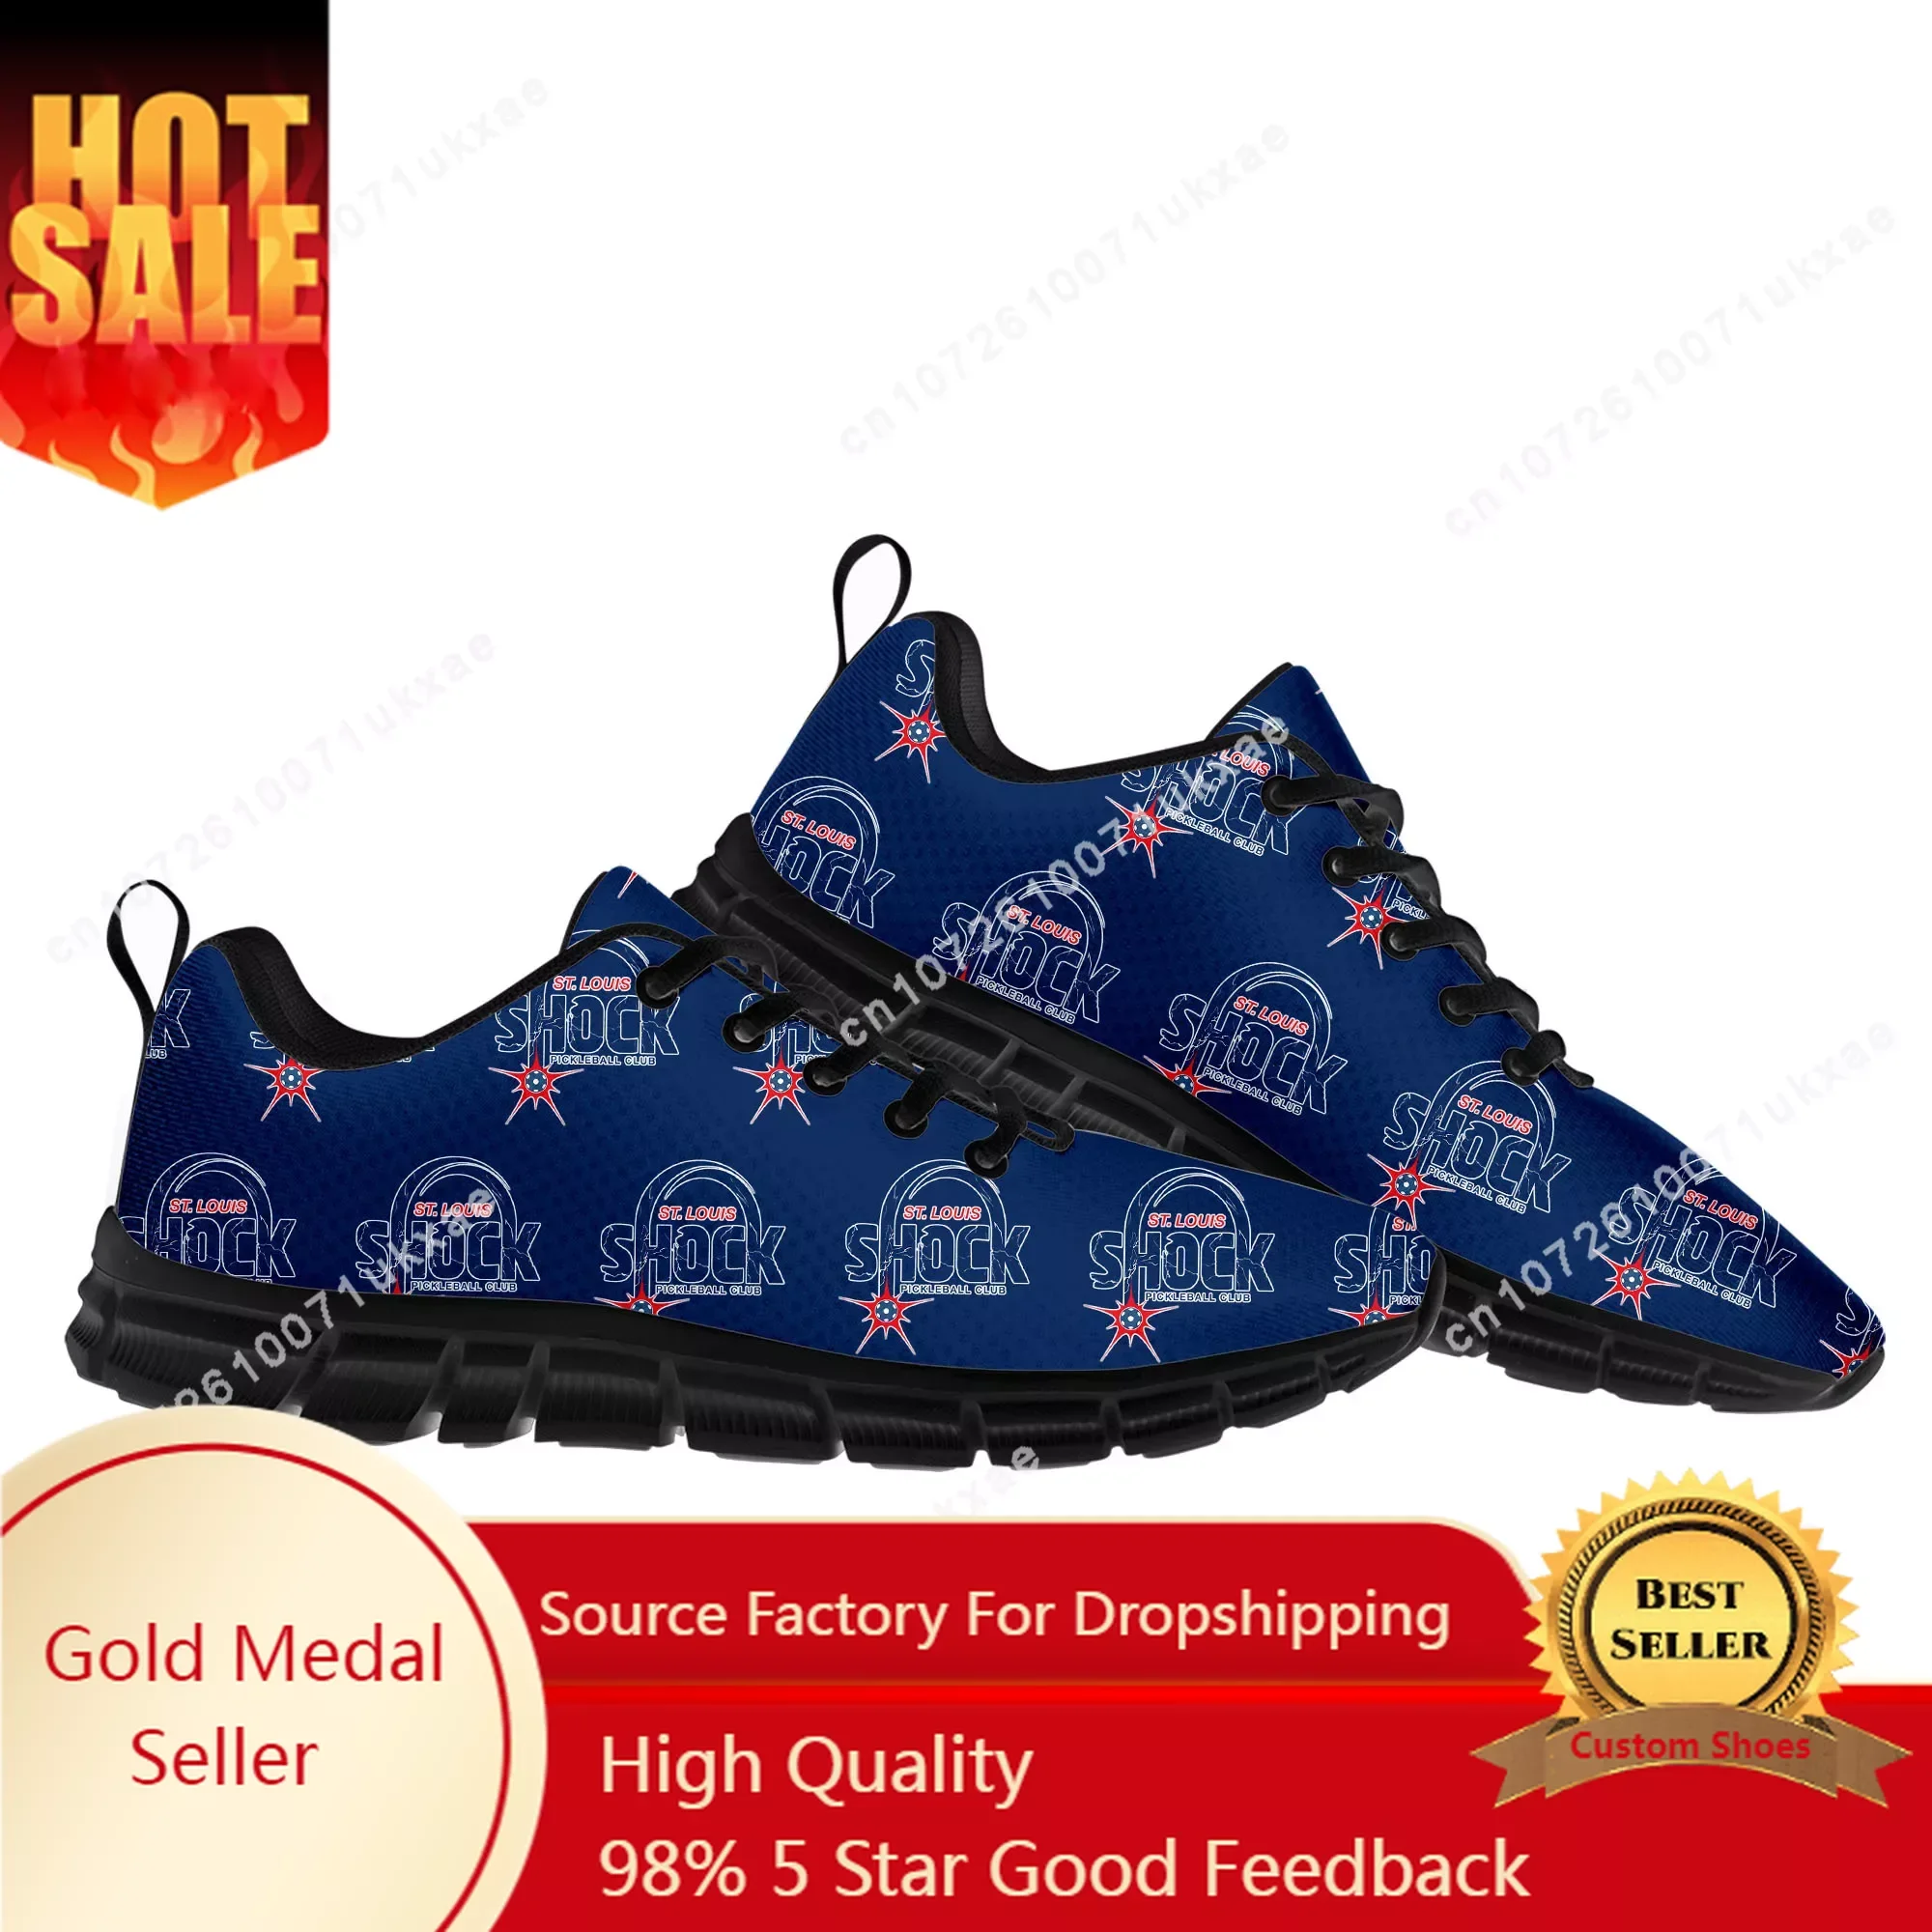 SHOCK pickleball Sports Shoes Mens Womens Teenager Kids Children Sneakers High Quality Parent Child Sneaker Customize DIY Shoe autumn product parent child sneakers first layer cowhide retro distressed dirty casual plaid back tail children s shoes qz100